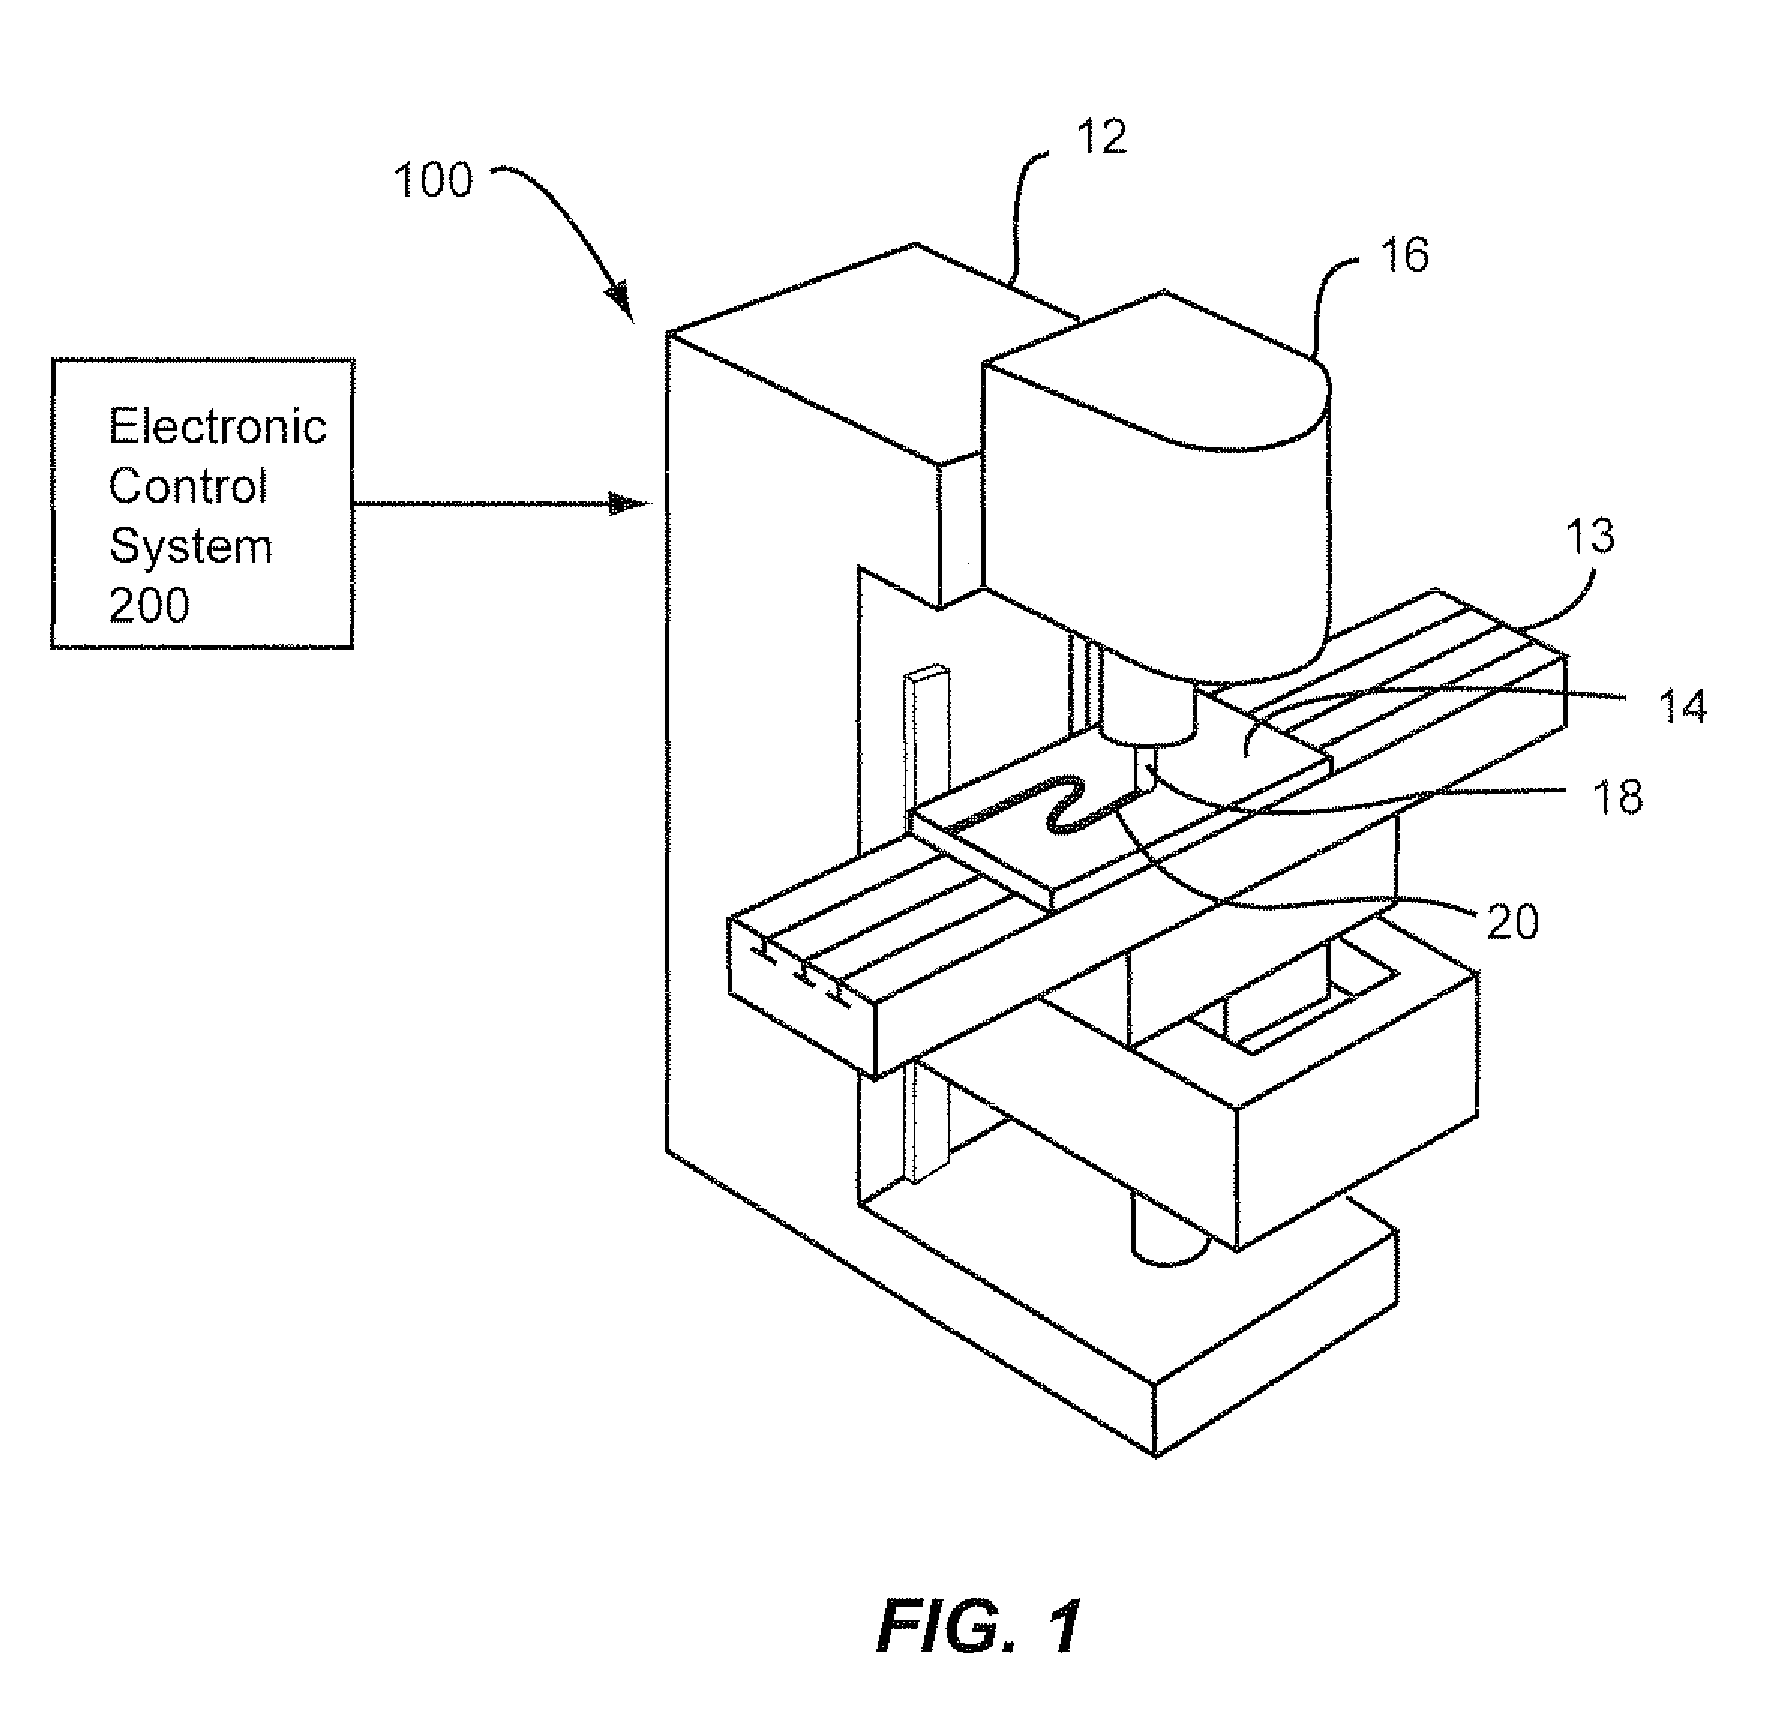 Friction stir welding spindle downforce and other control techniques, systems and methods